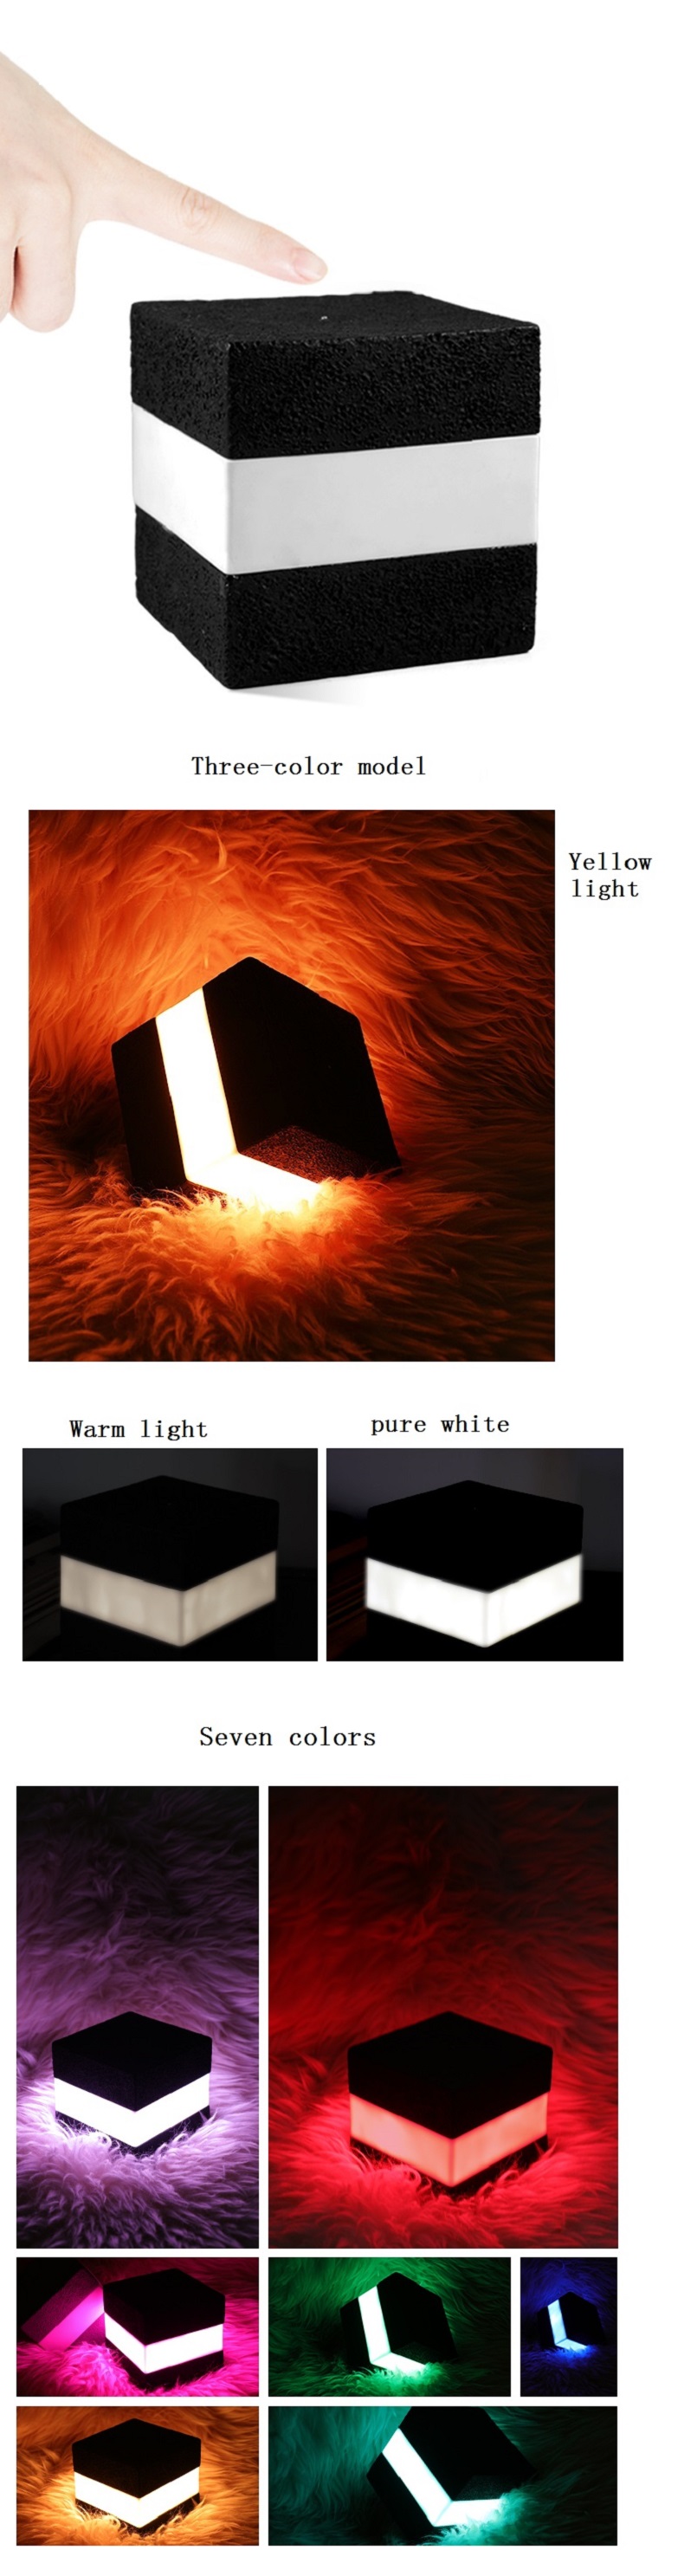 LED-Cube-Night-Light-USB-Rechargeable-Touch-Night-Light-Bar-Cafe-Restaurant-Decoration-Atmosphere-Li-1690530-7